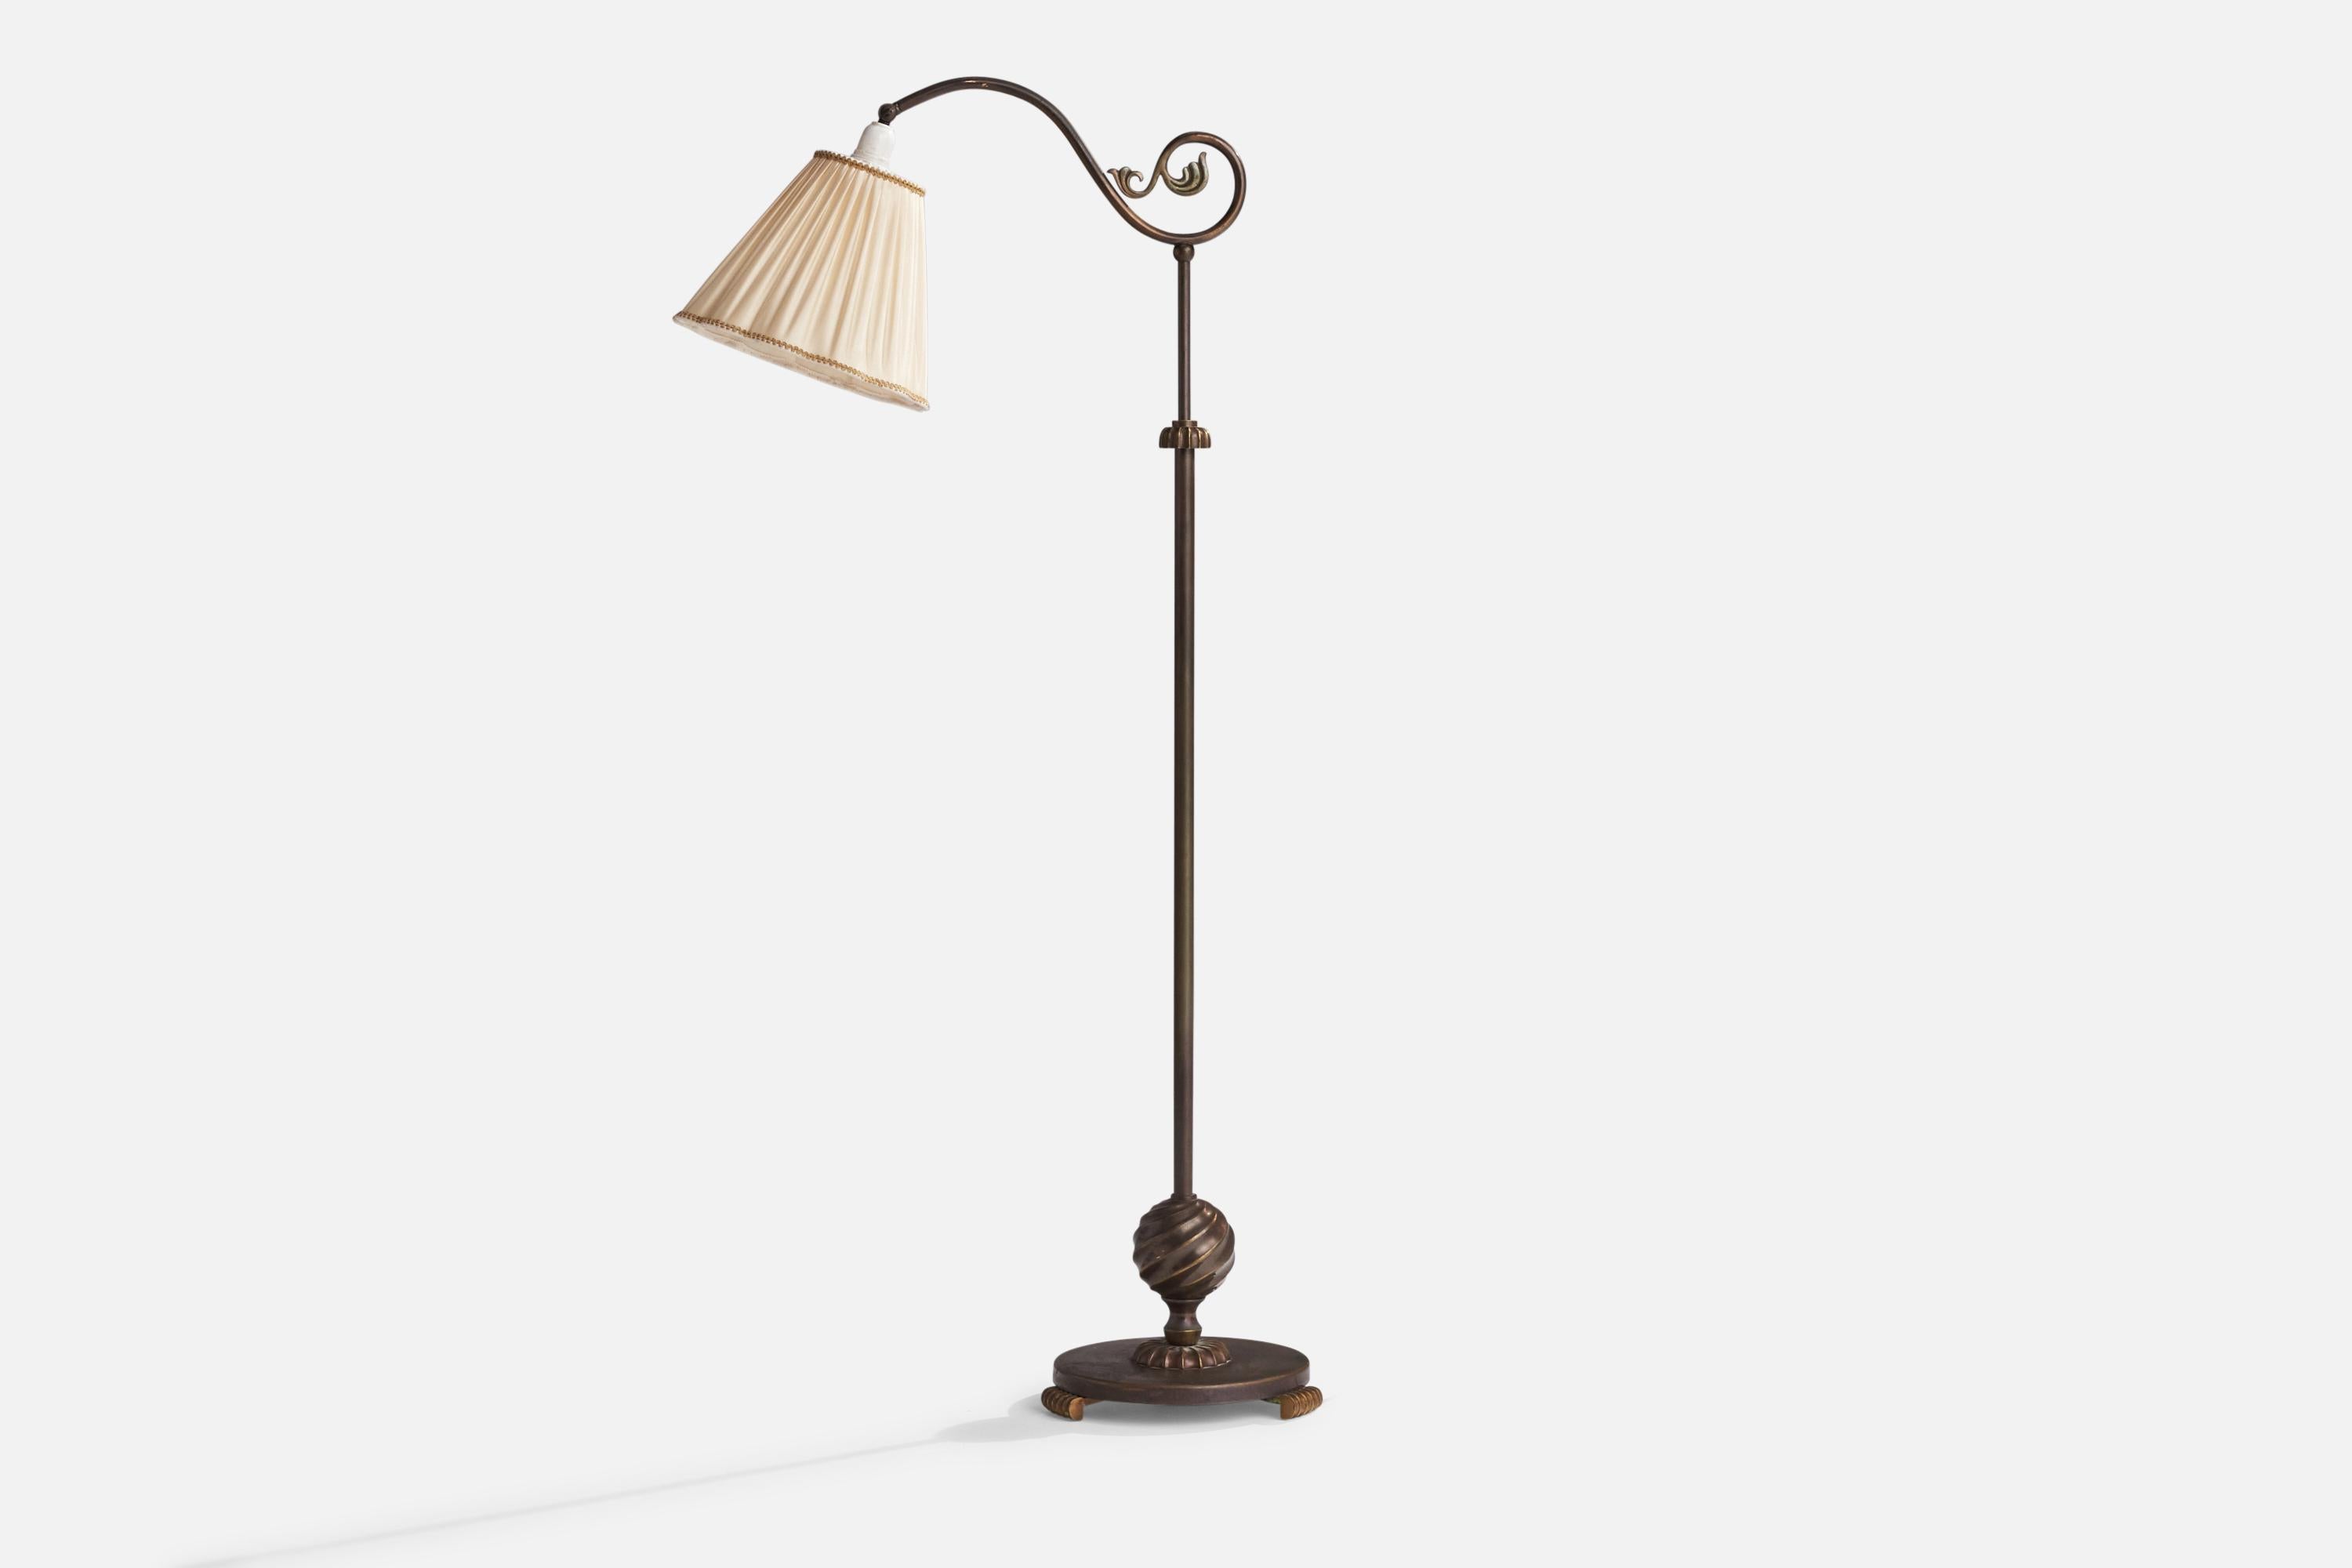 A brass and off-white fabric floor lamp designed and produced in Sweden, 1930s.

Dimensions variable

Overall Dimensions (inches): 51”  H x 10” W x 21.5” D
Stated dimensions include shade.
Bulb Specifications: E-26 Bulb
Number of Sockets: 1
All